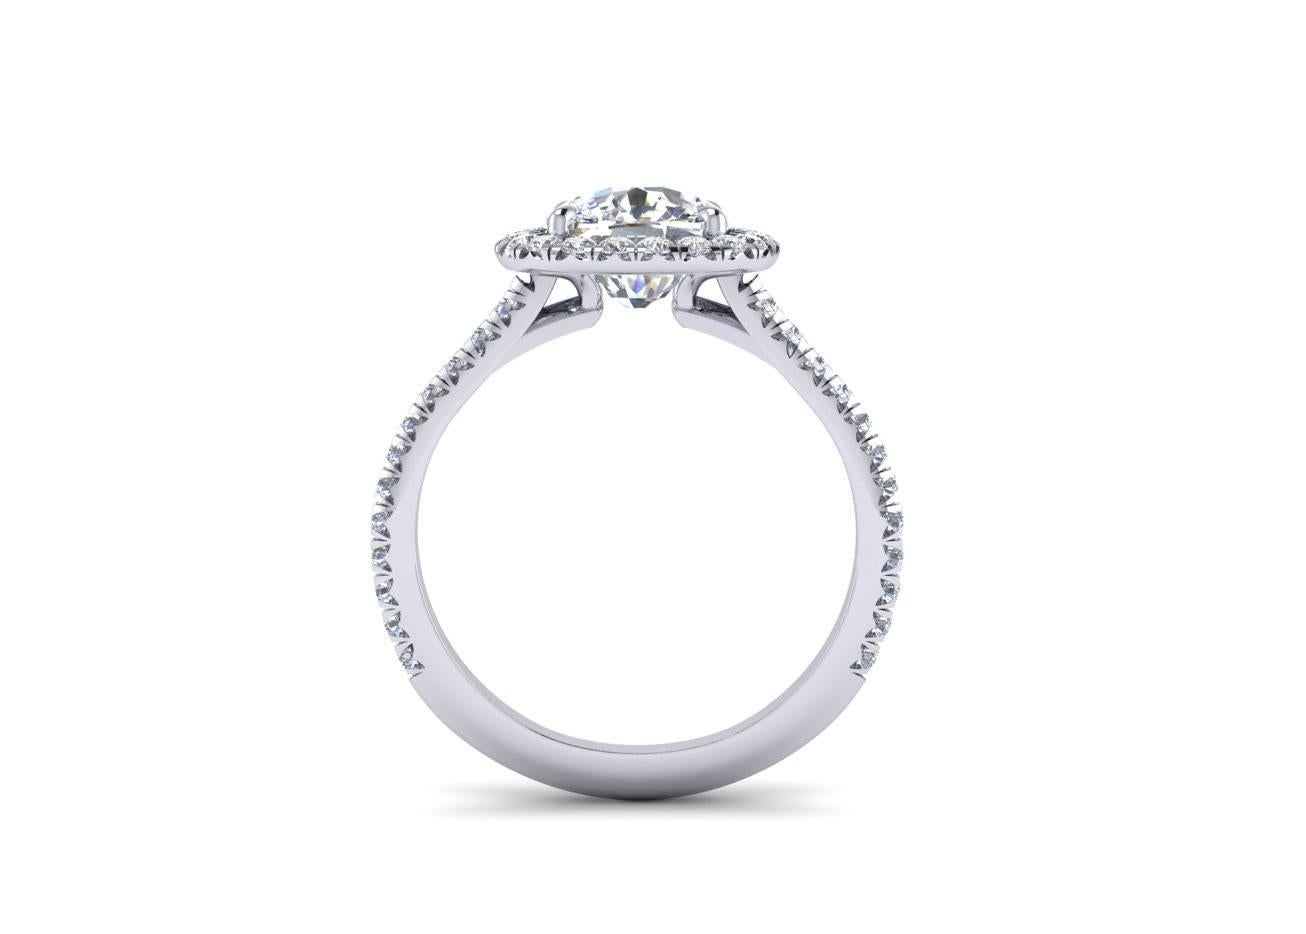 Ferrucci GIA Certified 2.03 carat cushion cut wonderful diamond, F color, VS1 clarity, Triple Excellent in an hand made Platinum mounting, with a halo of white diamonds and diamond of the shank, hand set and made by Italian master jeweler in New